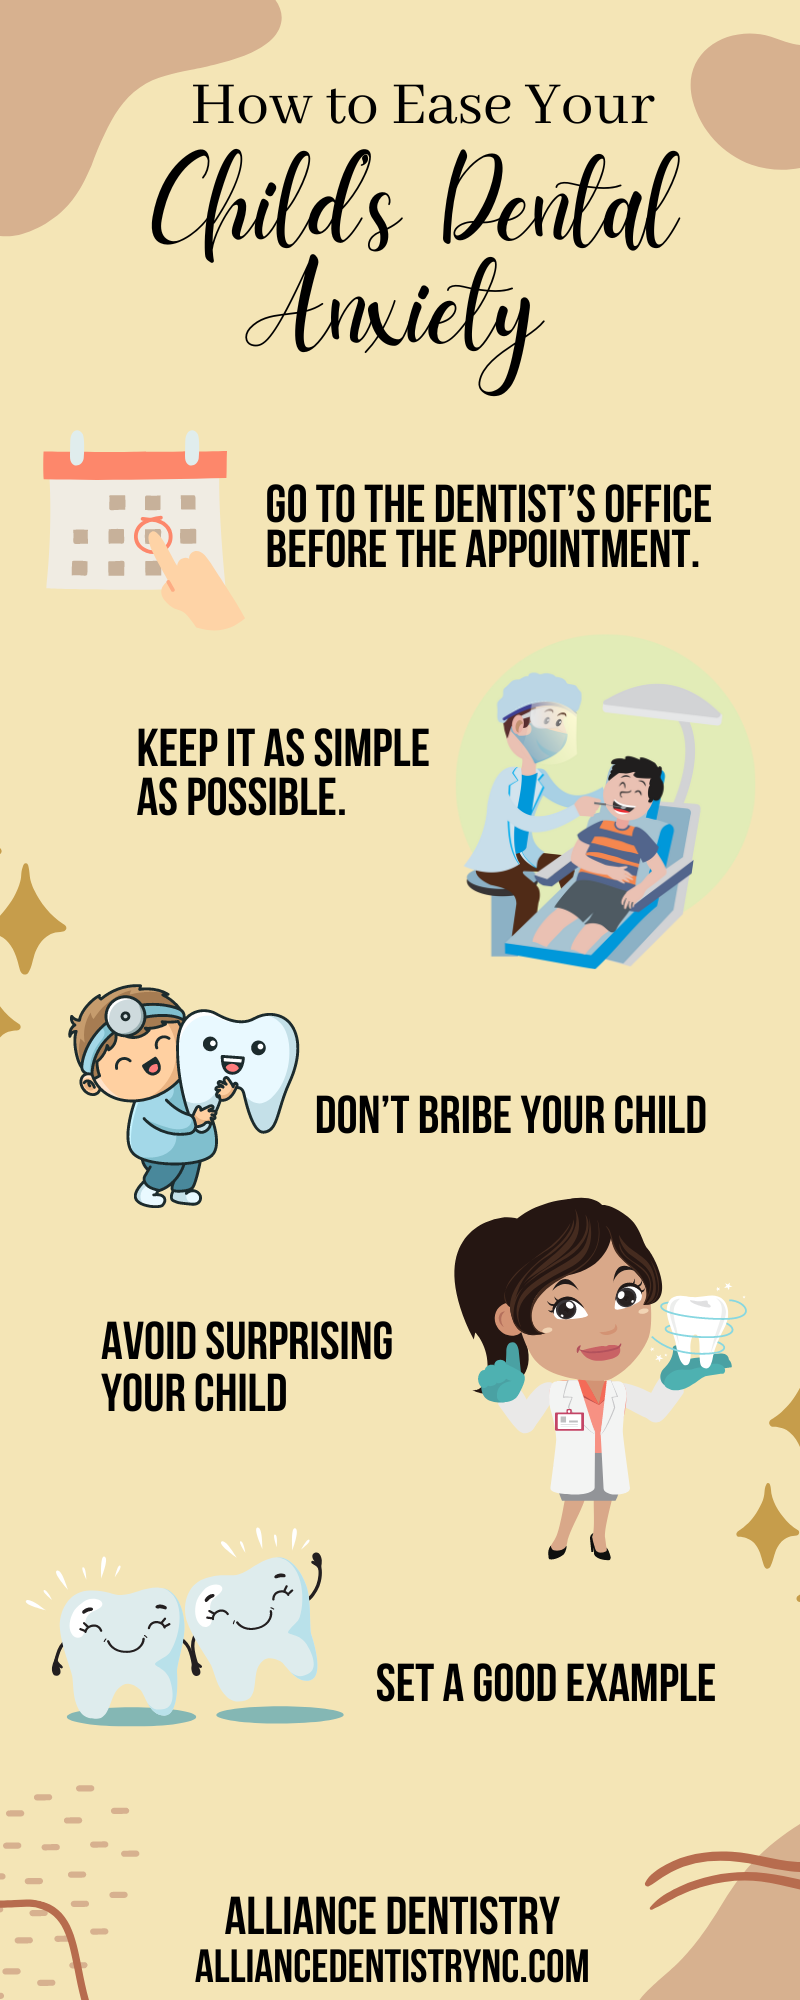 How to Ease Your Childs Dental Anxiety Infographic